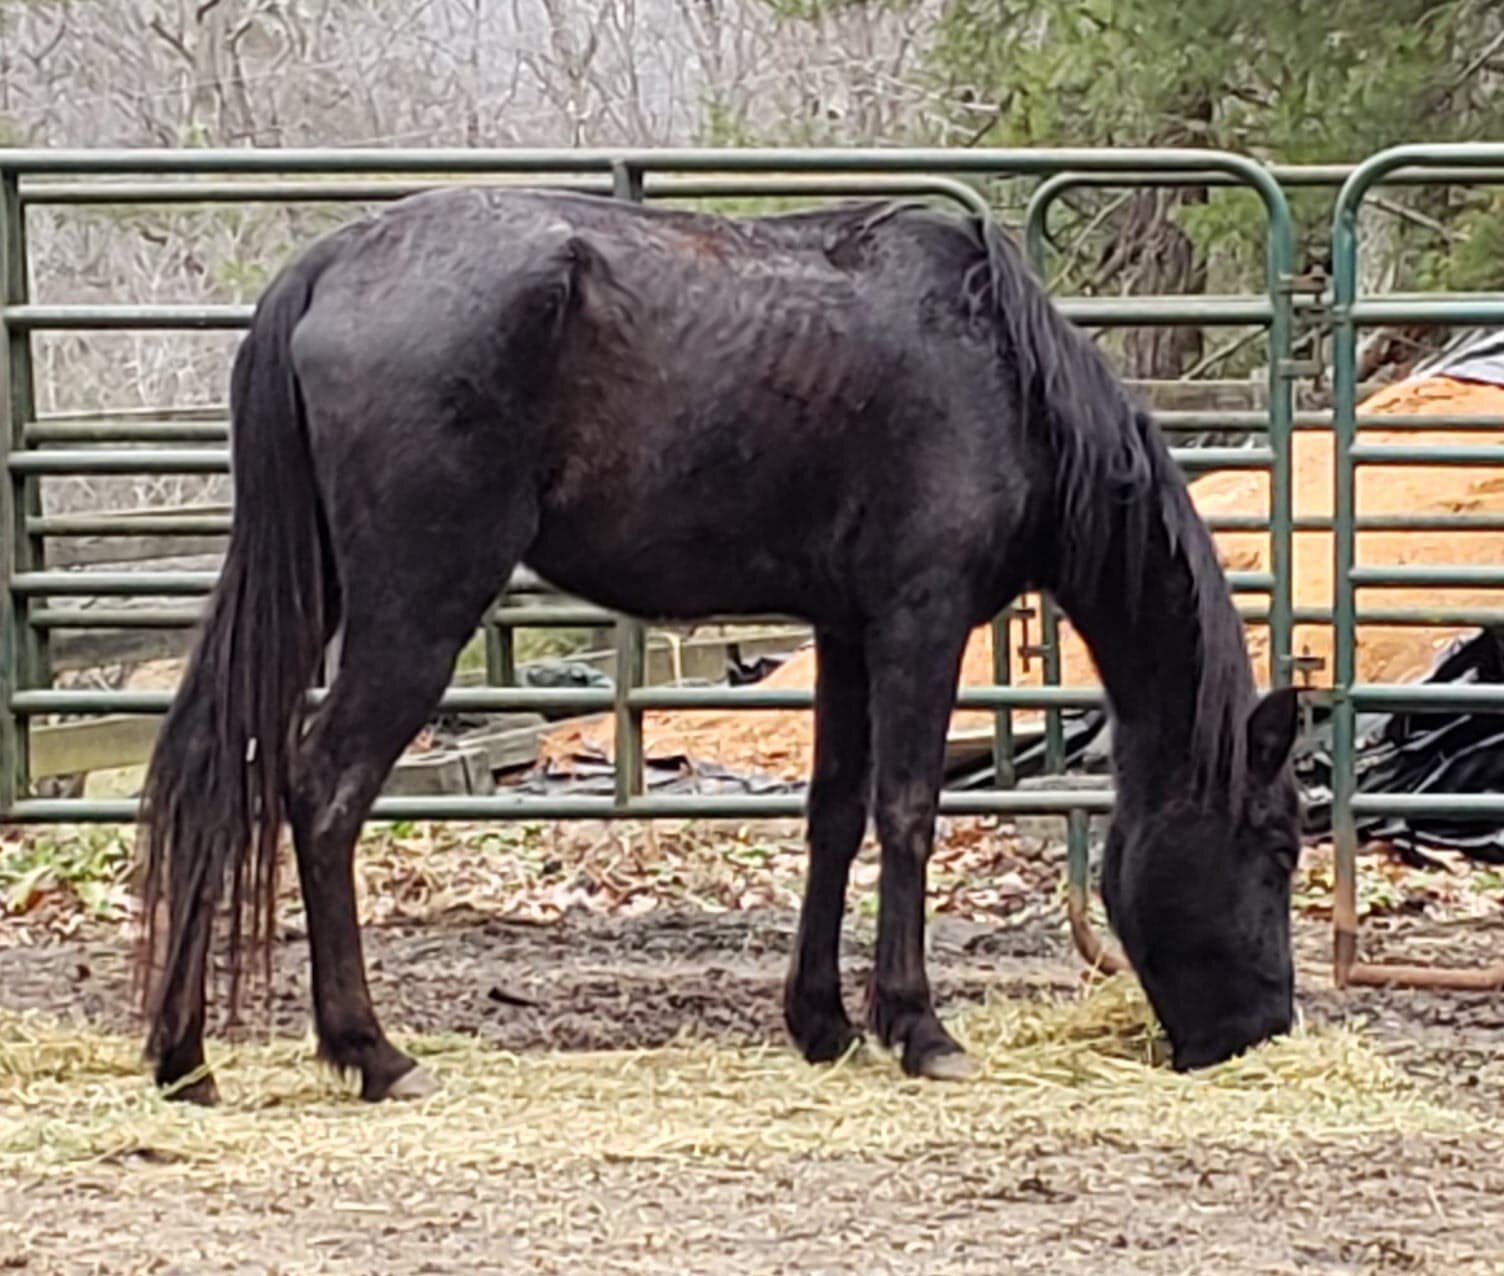 Black Beauty after regaining health in foster care